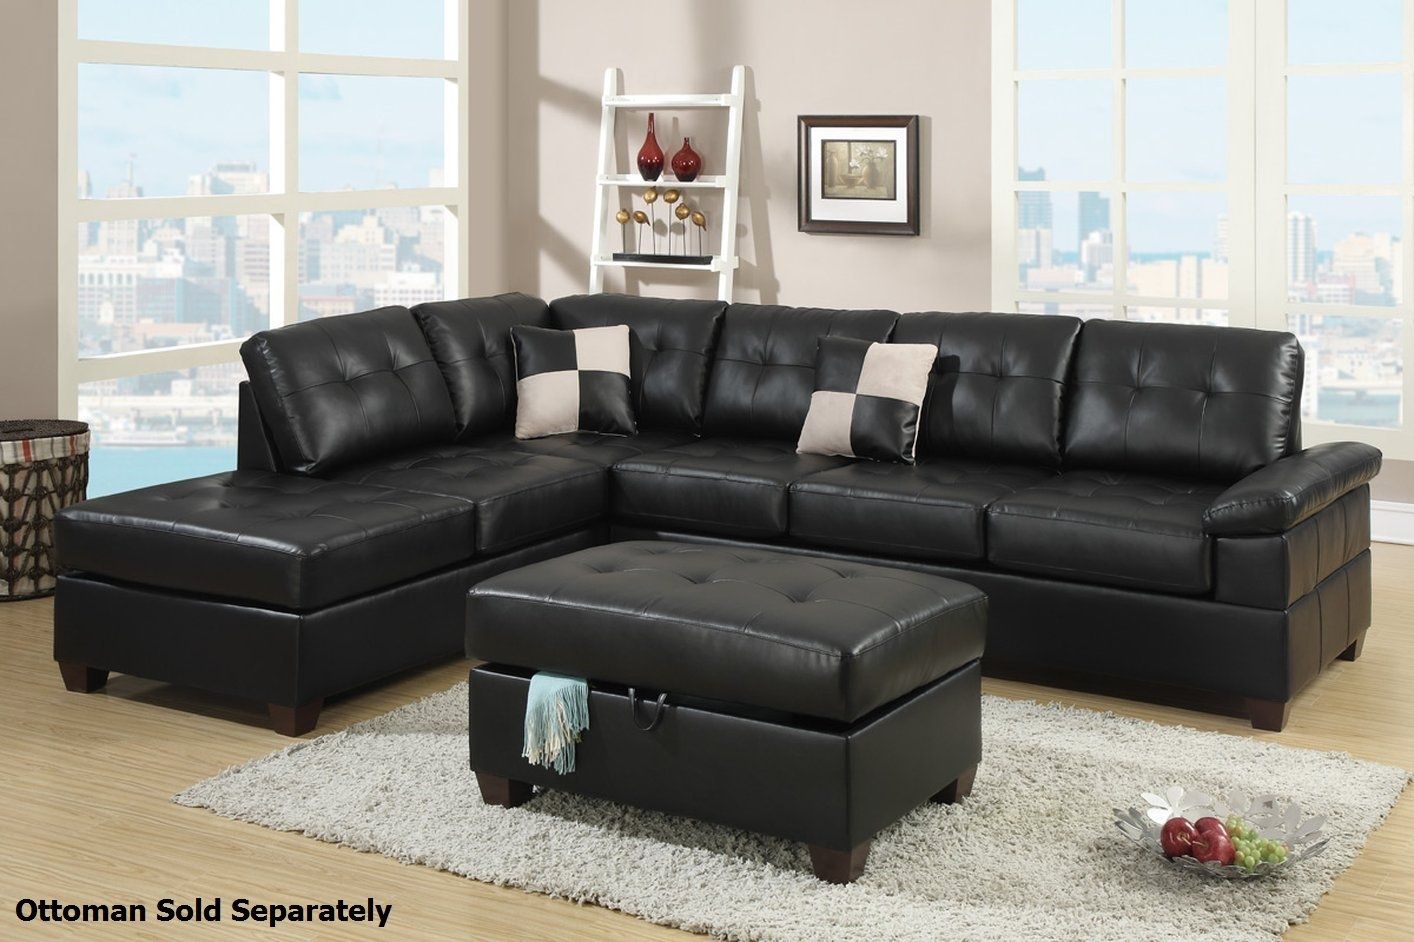 Beautiful Sectional Sofas Rooms To Go 77 For Office Sofa Ideas With Throughout Rooms To Go Sectional Sofas (View 8 of 10)